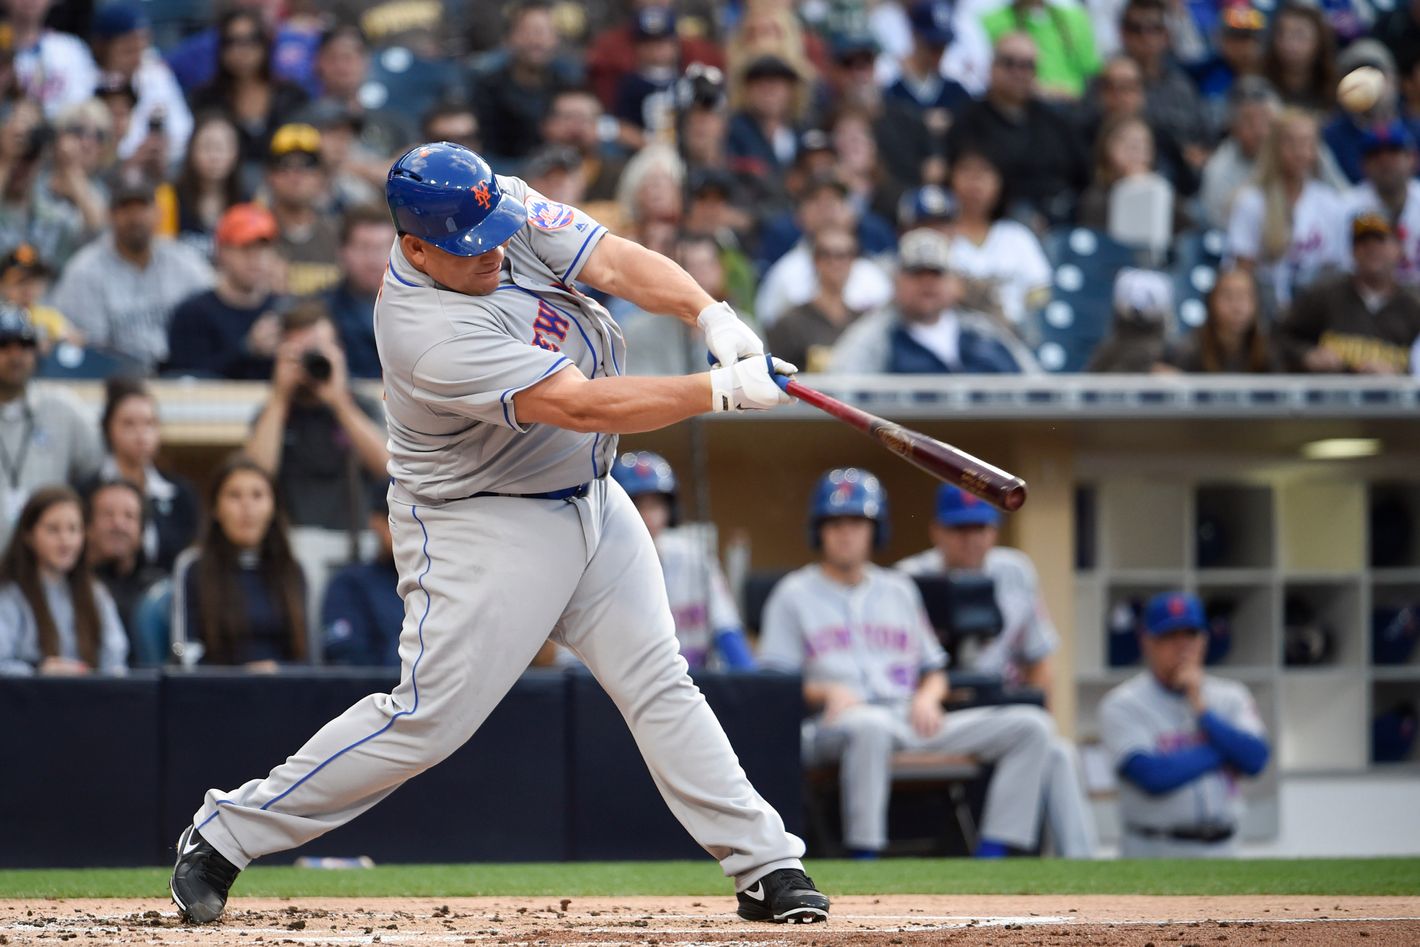 Mets Pitcher Bartolo Colon Becomes Oldest Player to Hit First Home Run